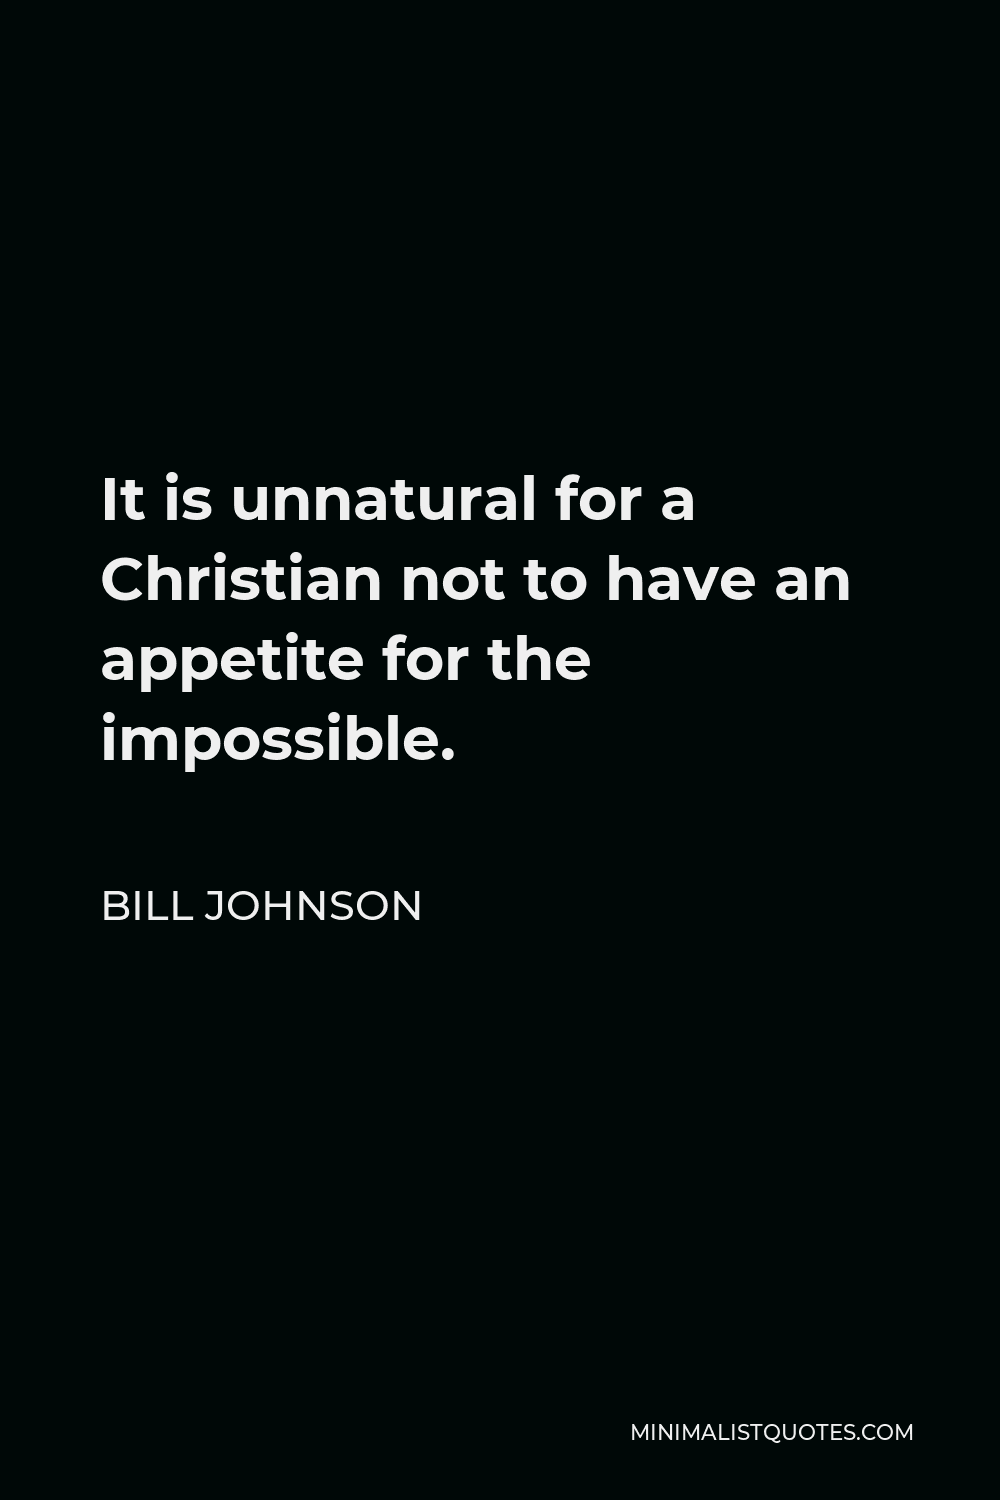 Bill Johnson Quote - It is unnatural for a Christian not to have an appetite for the impossible.